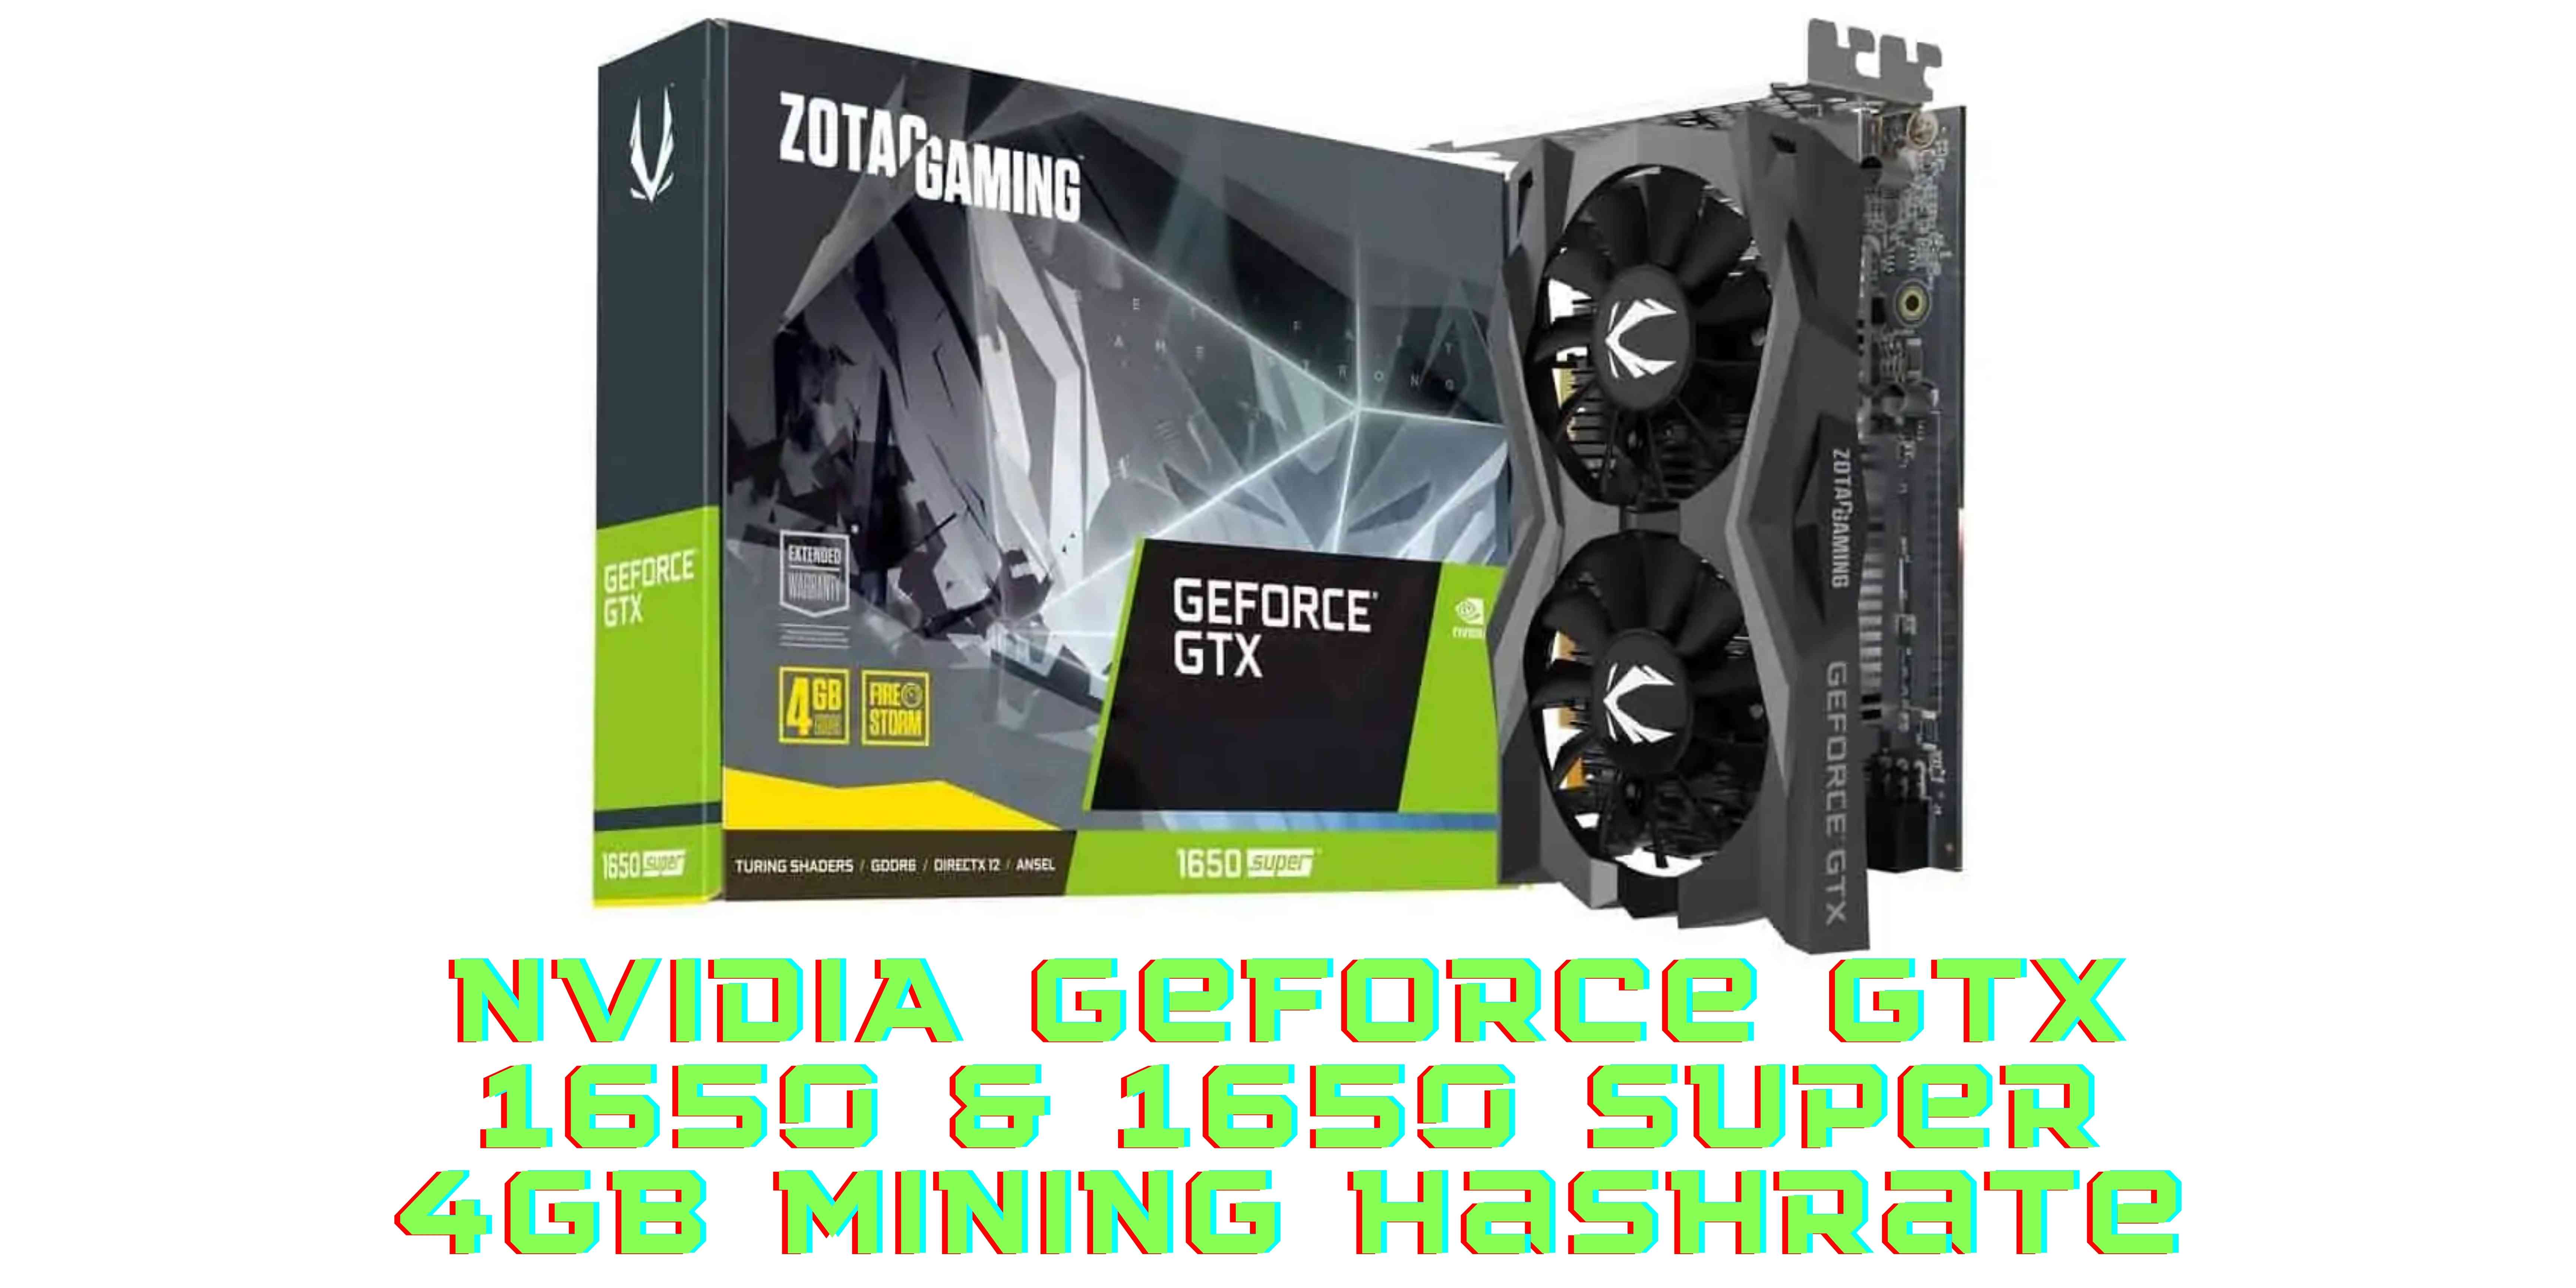 Is It Worth It To Mine With The NVIDIA GTX 1650 Super Mining Hashrate?